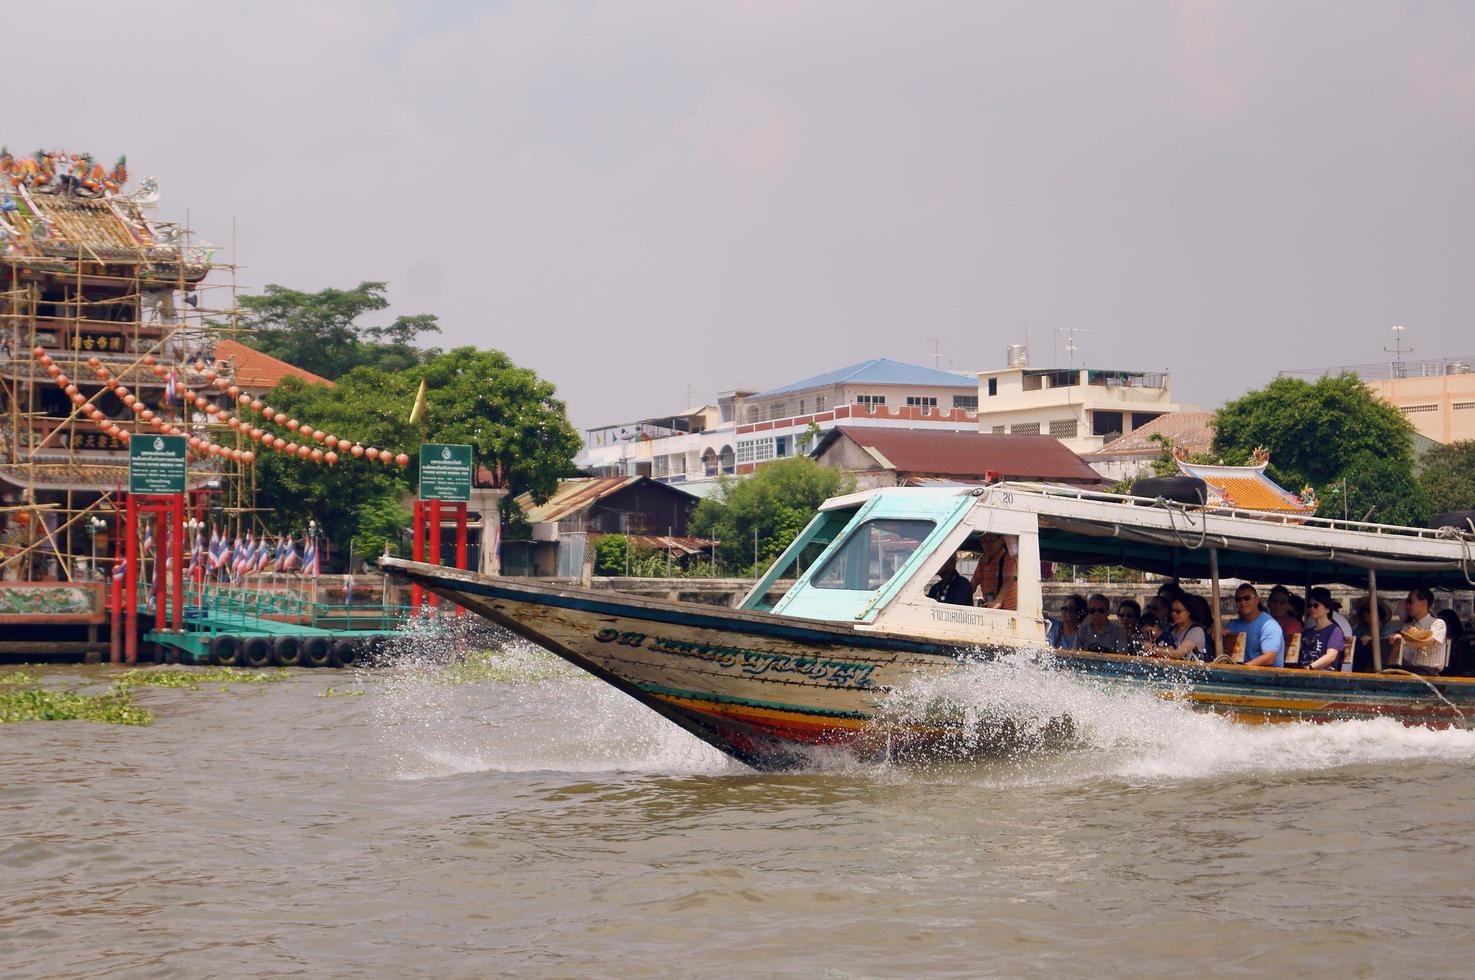 Thailand, Bangkok, people sailing on a boat on the canal photo